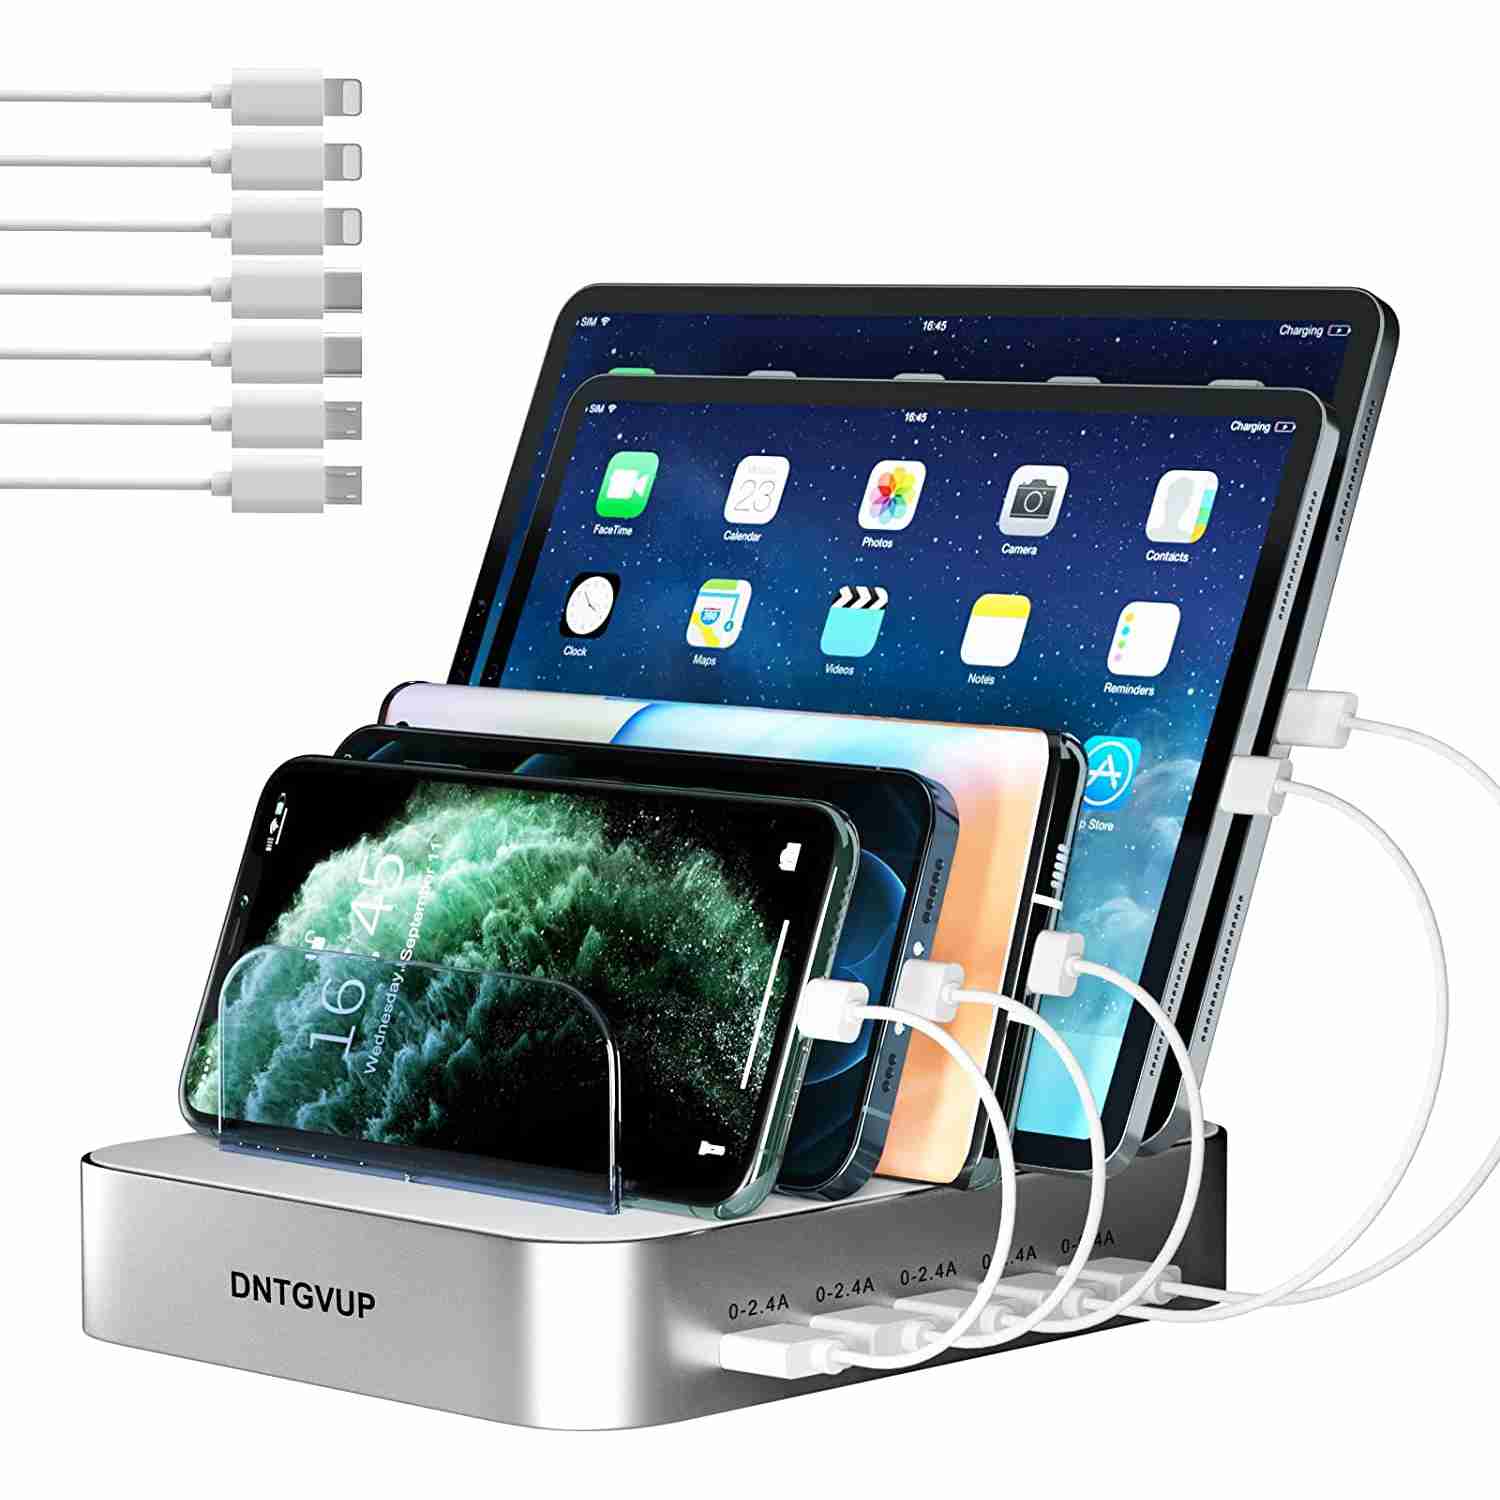 charging-station-for-multiple-devices-dntgvup-5-port-multi for cheap